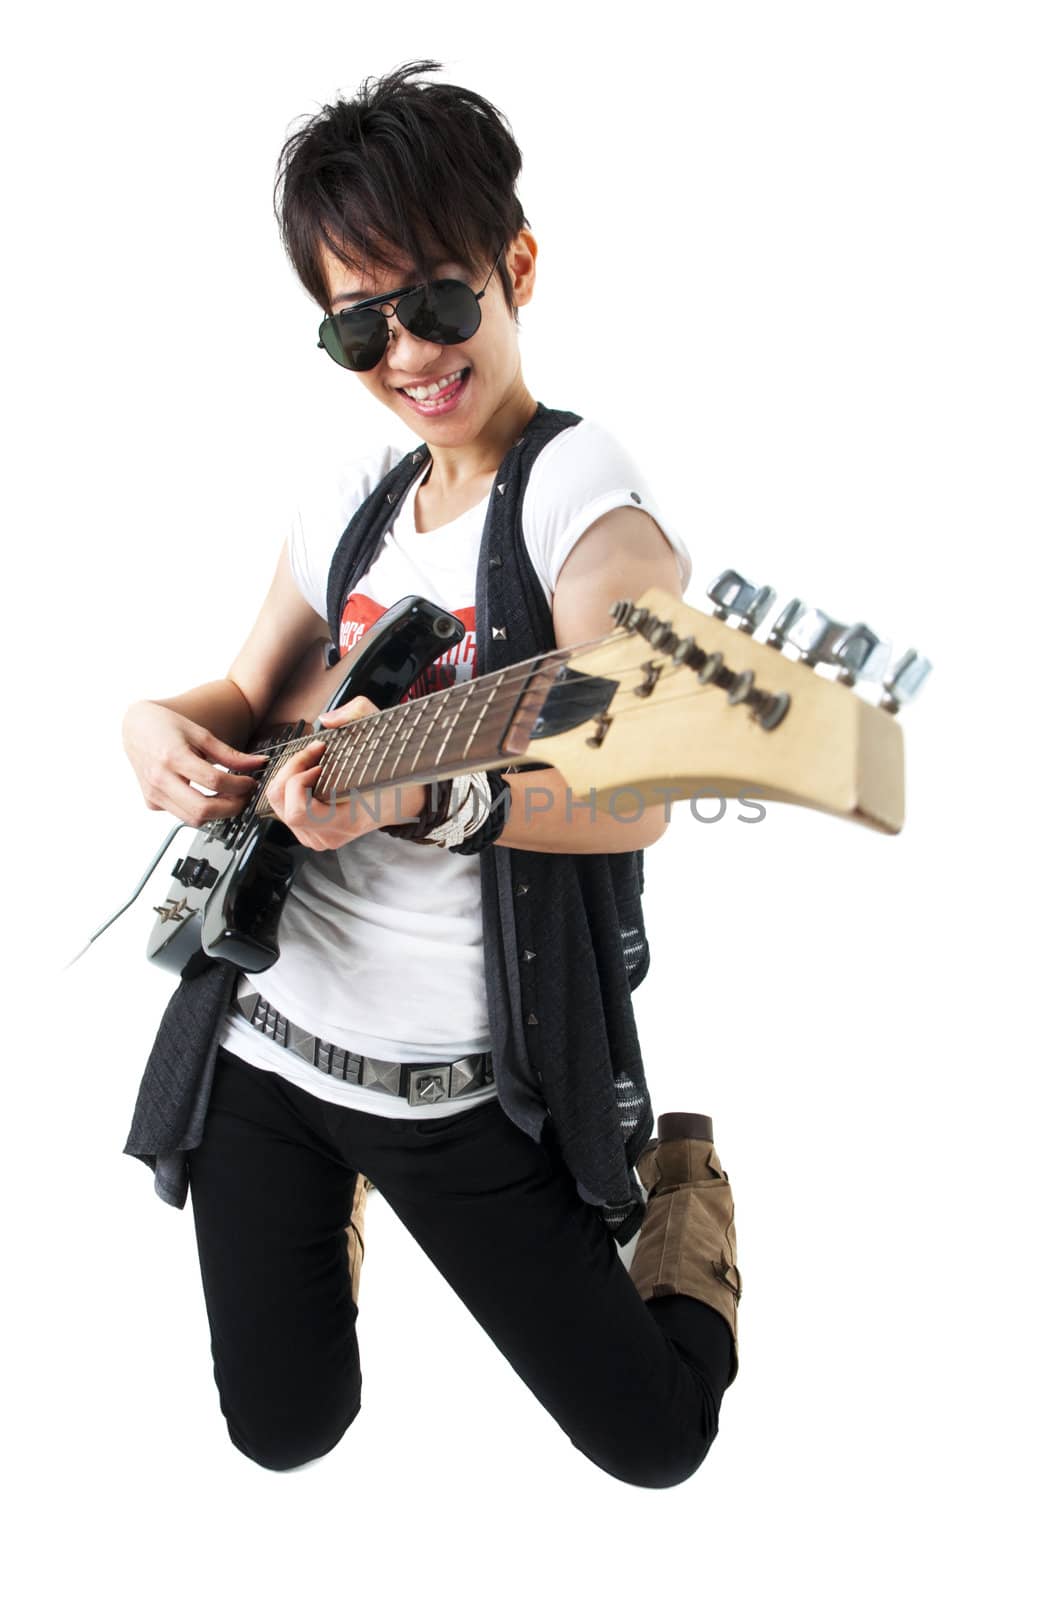 Punk Rockstar holding a guitar kneeling isolated in white